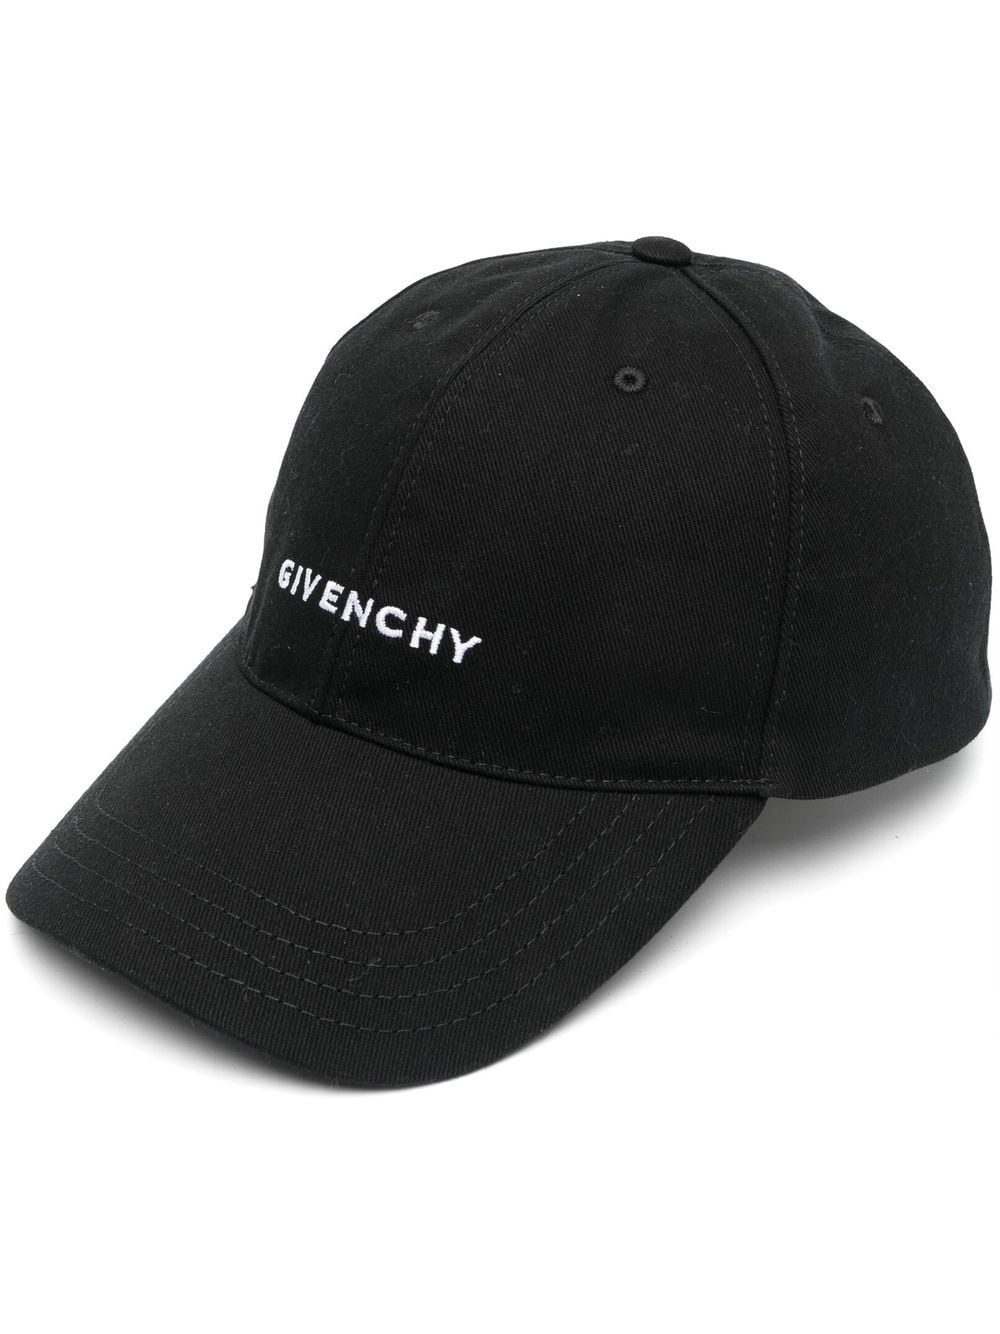 embroidered logo cap - 1